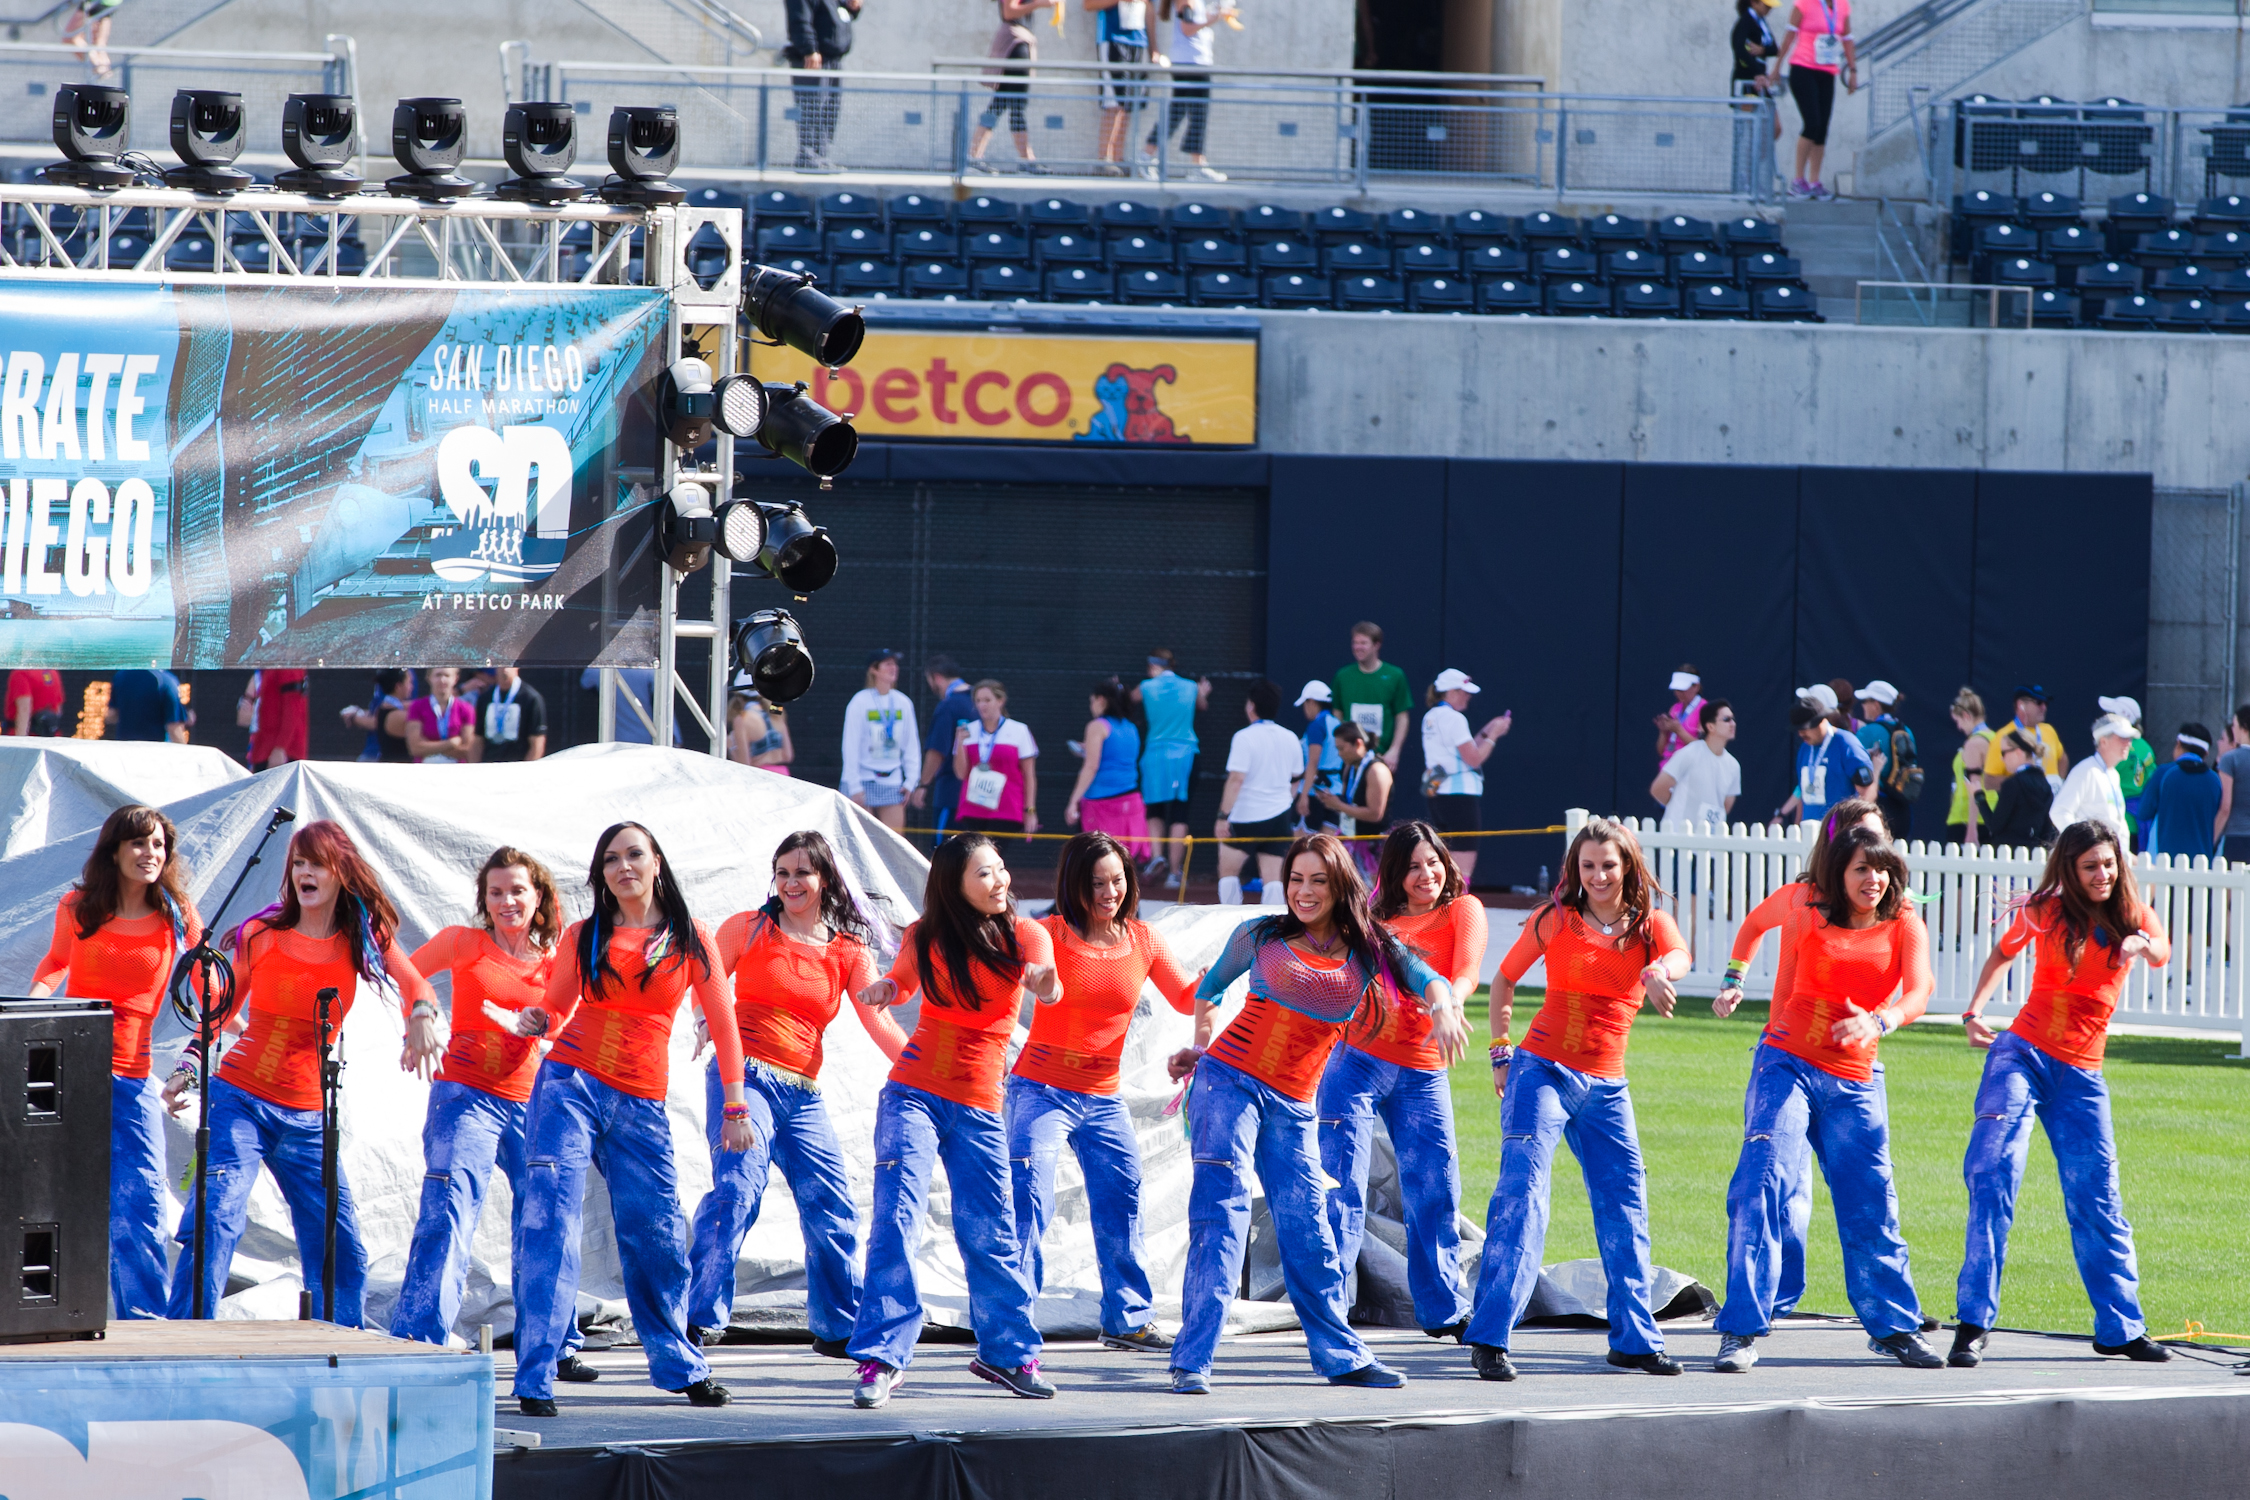 Party Fitness Performing  at Petco Park